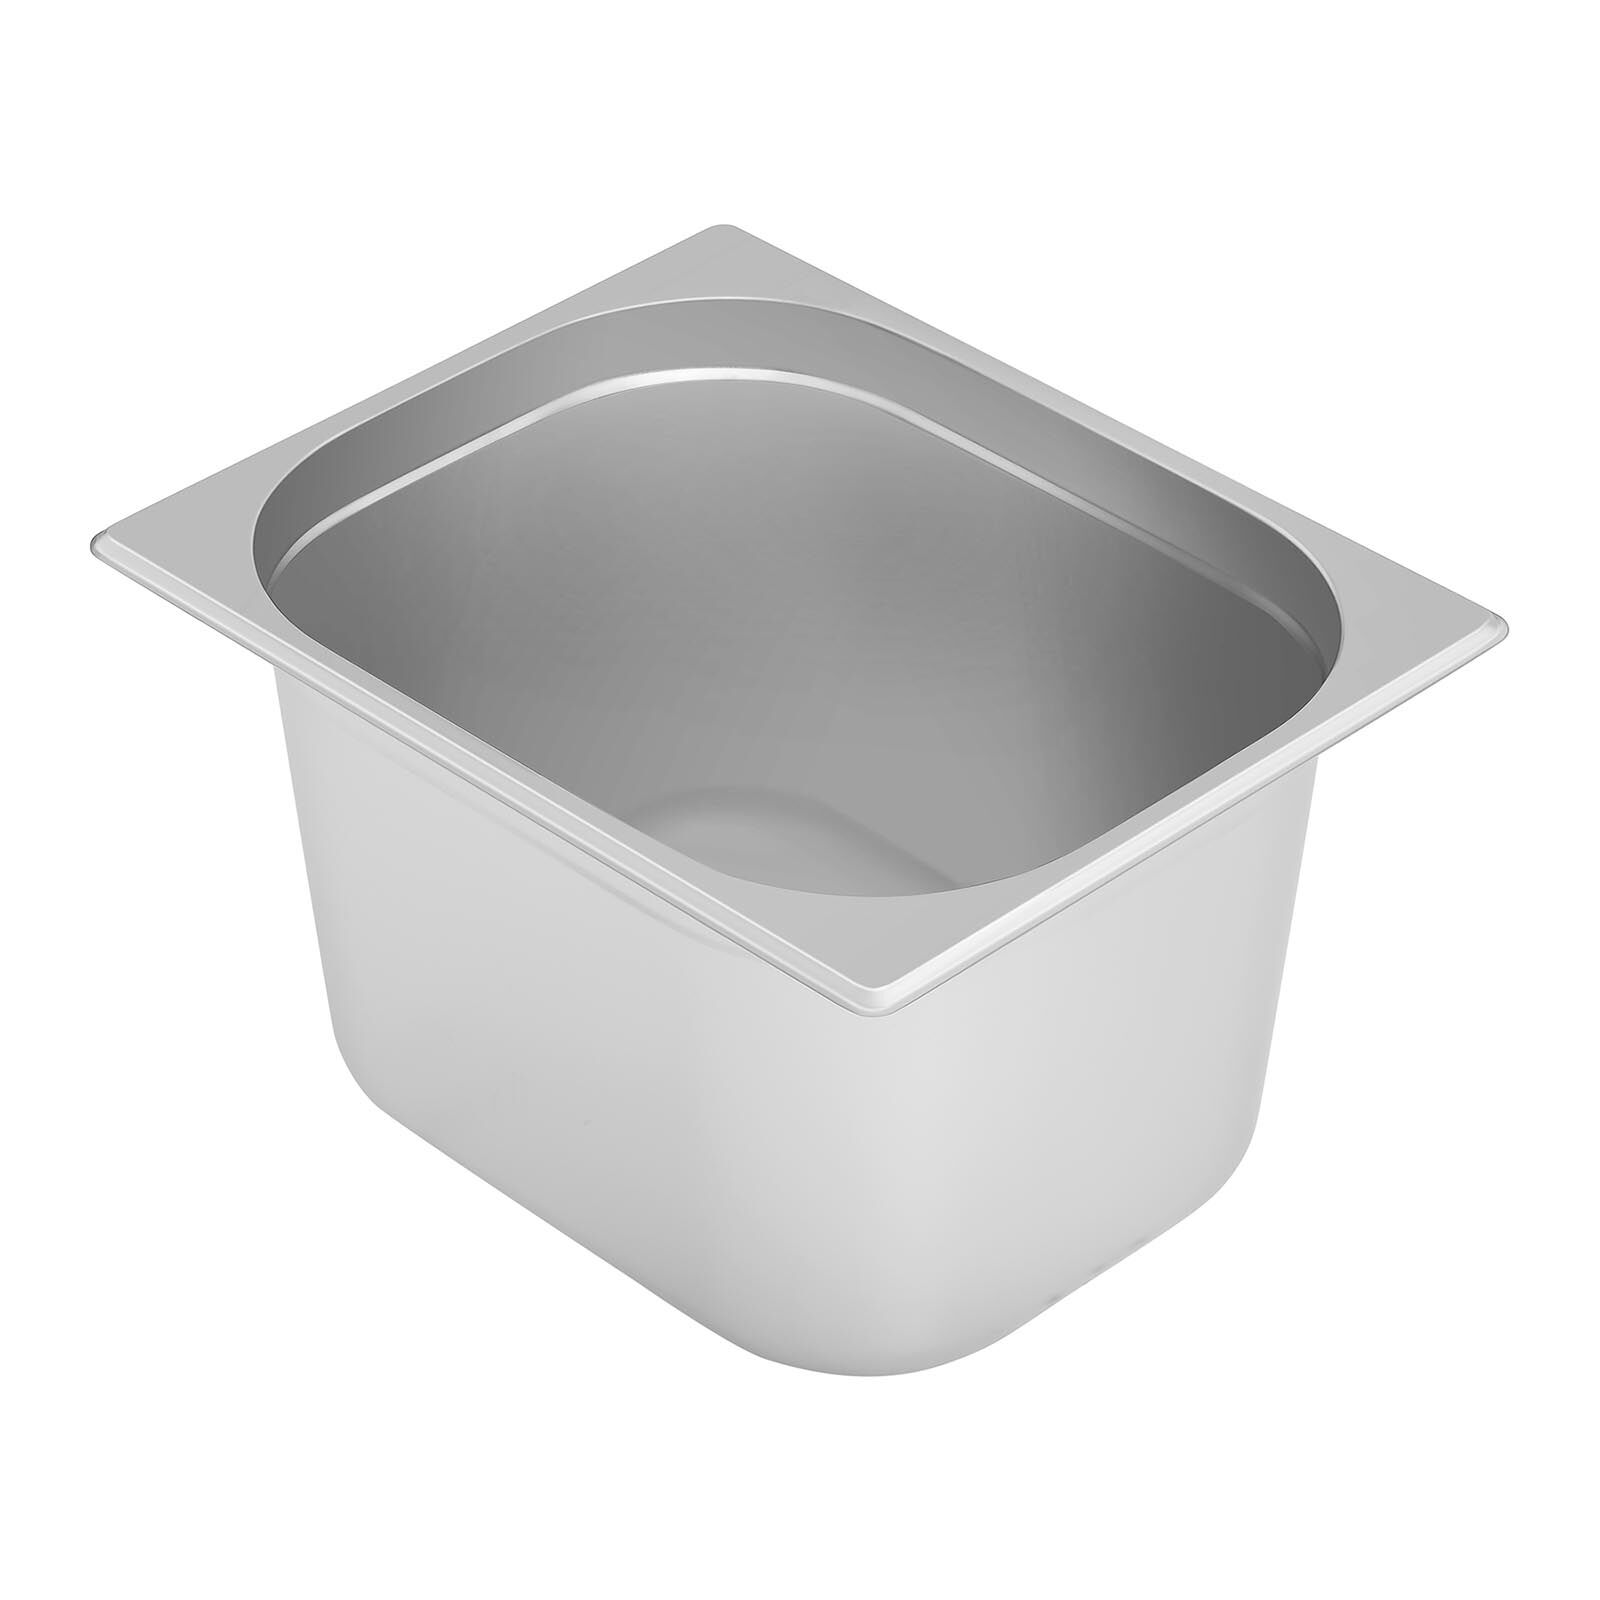 Royal Catering Gastronorm Tray - 1/2 - 200 mm